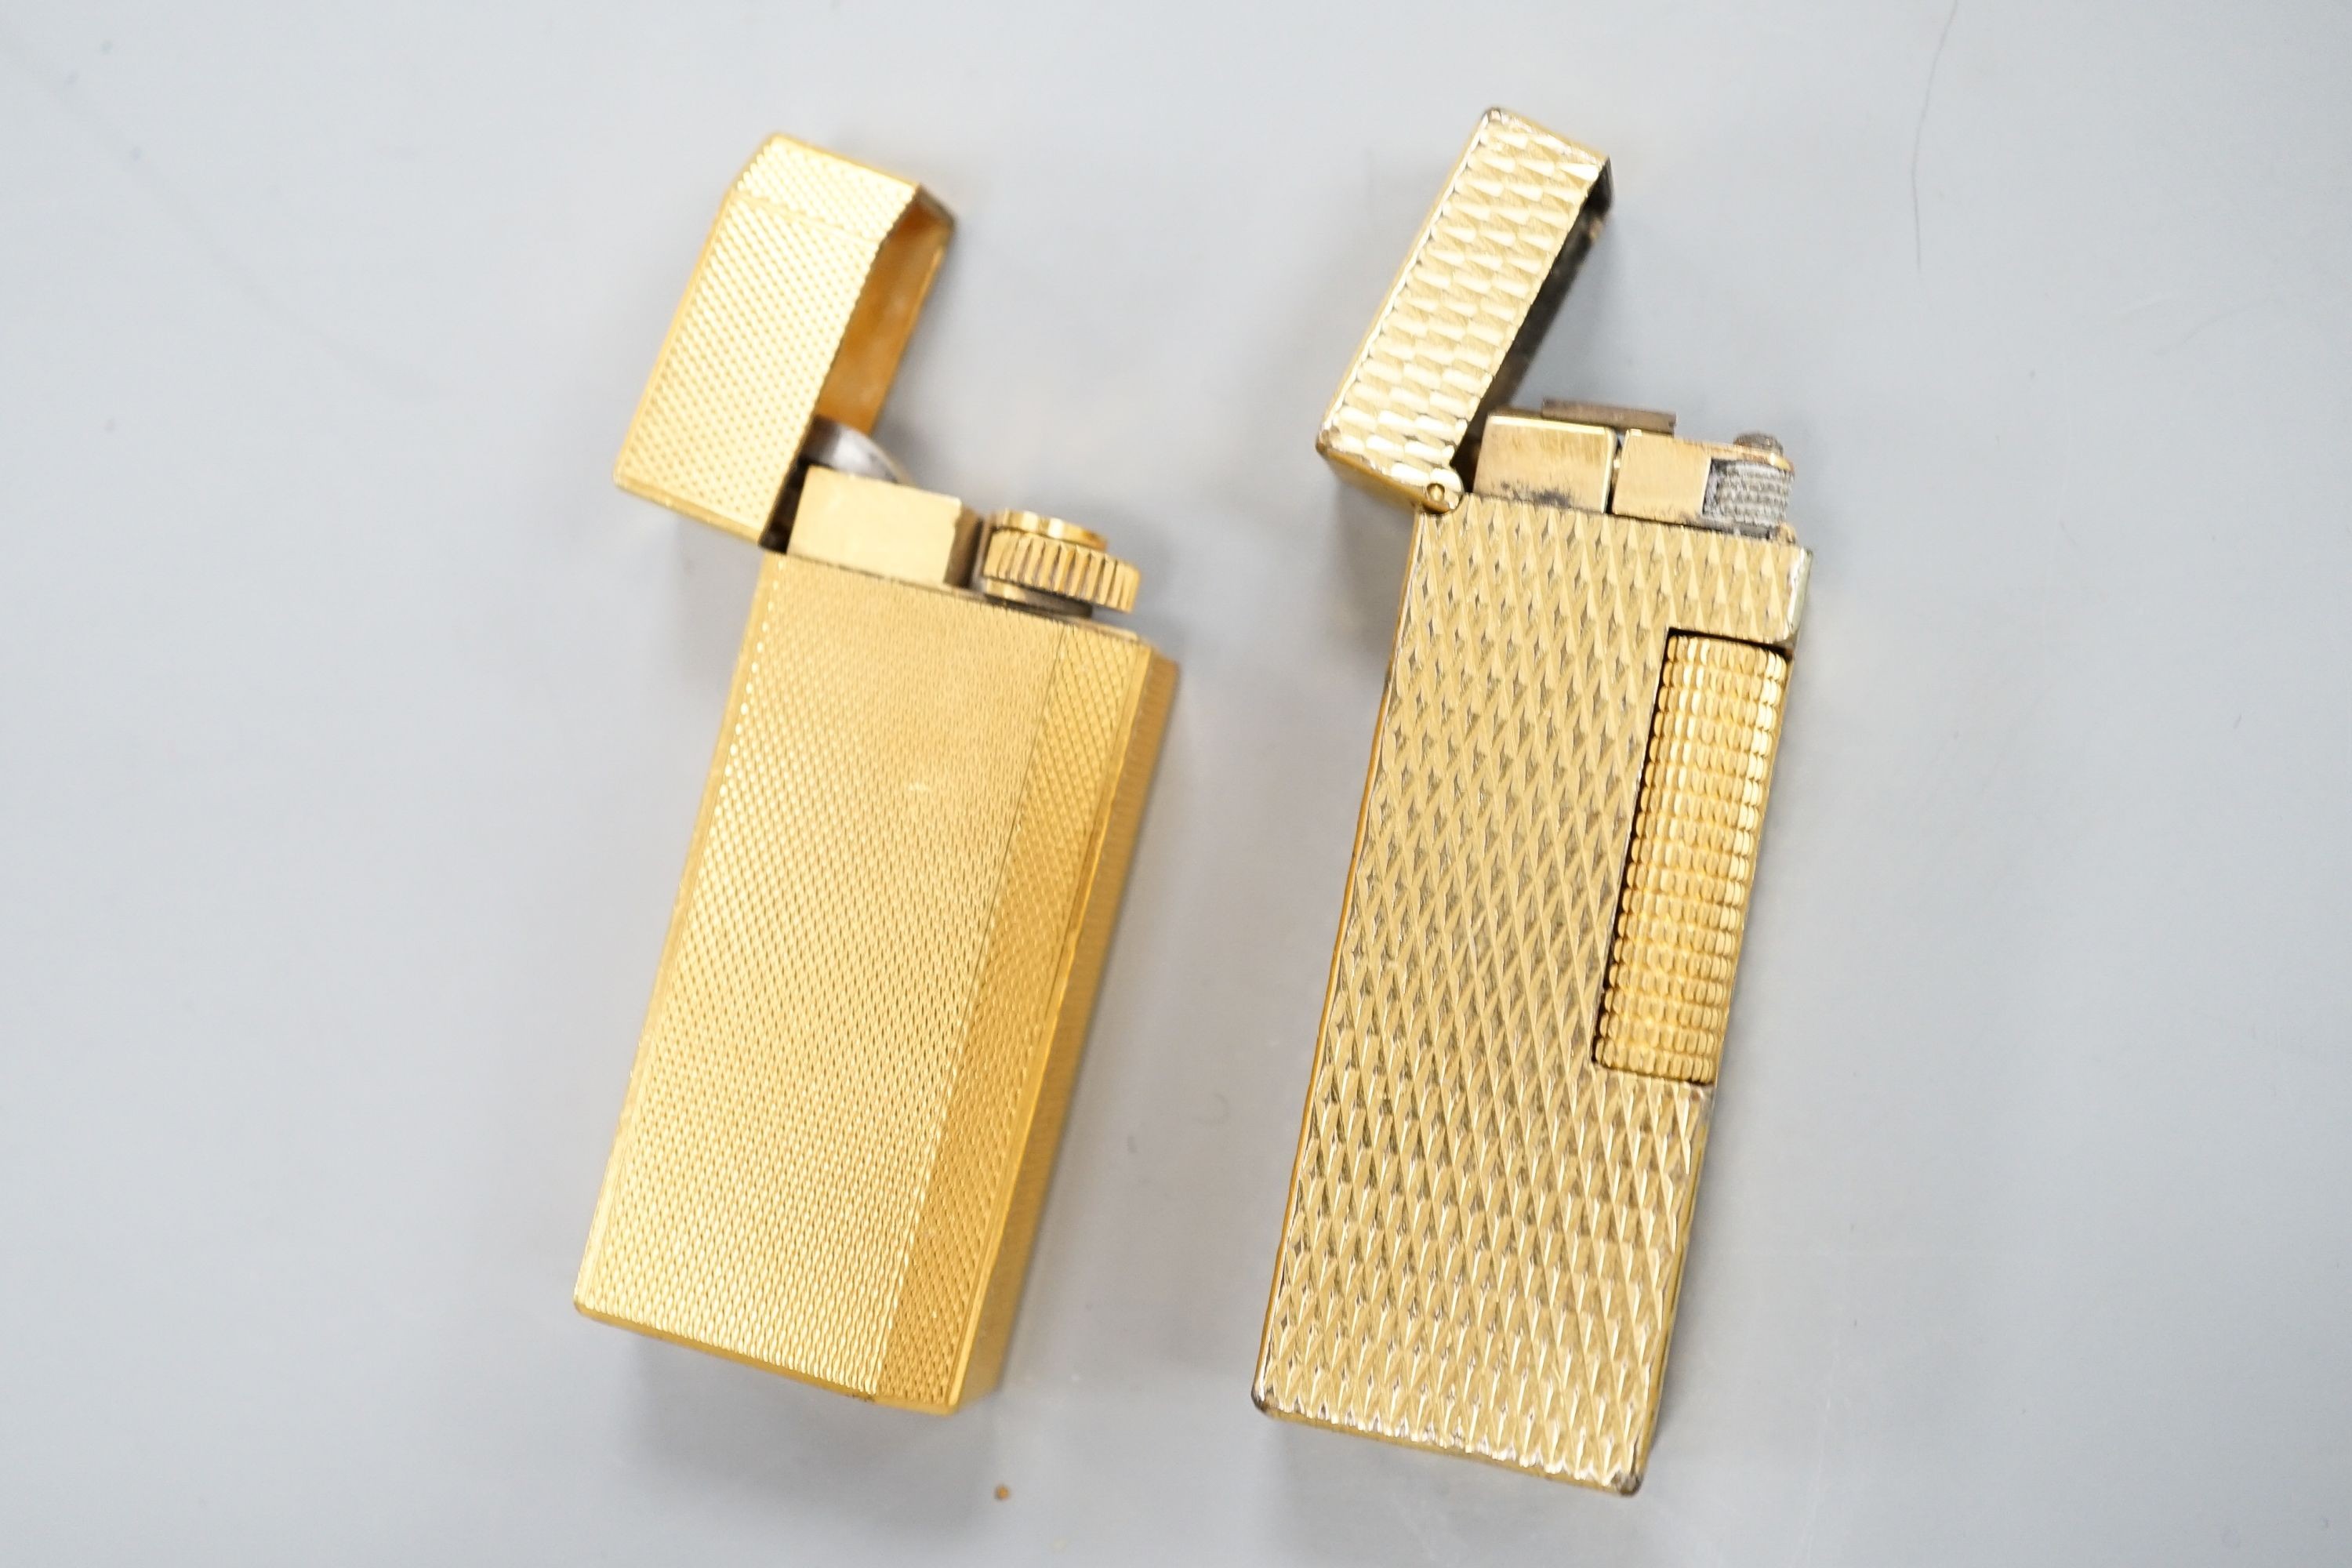 A gold plated Cartier lighter and a similar Dupont lighter